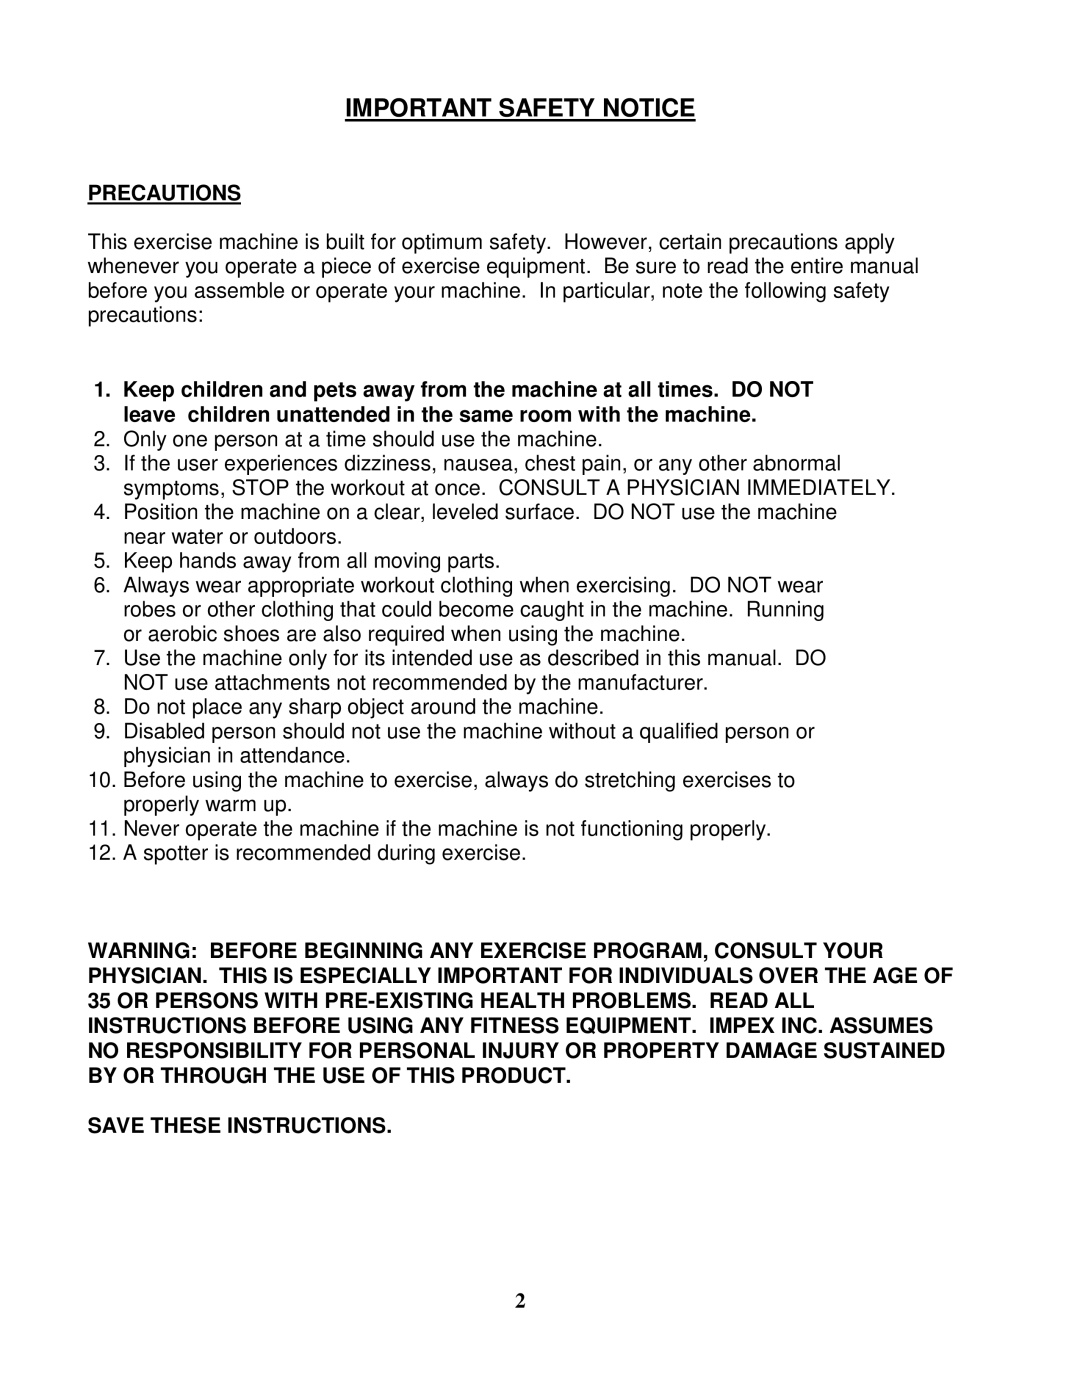 Impex CB-349 manual Important Safety Notice, Precautions 